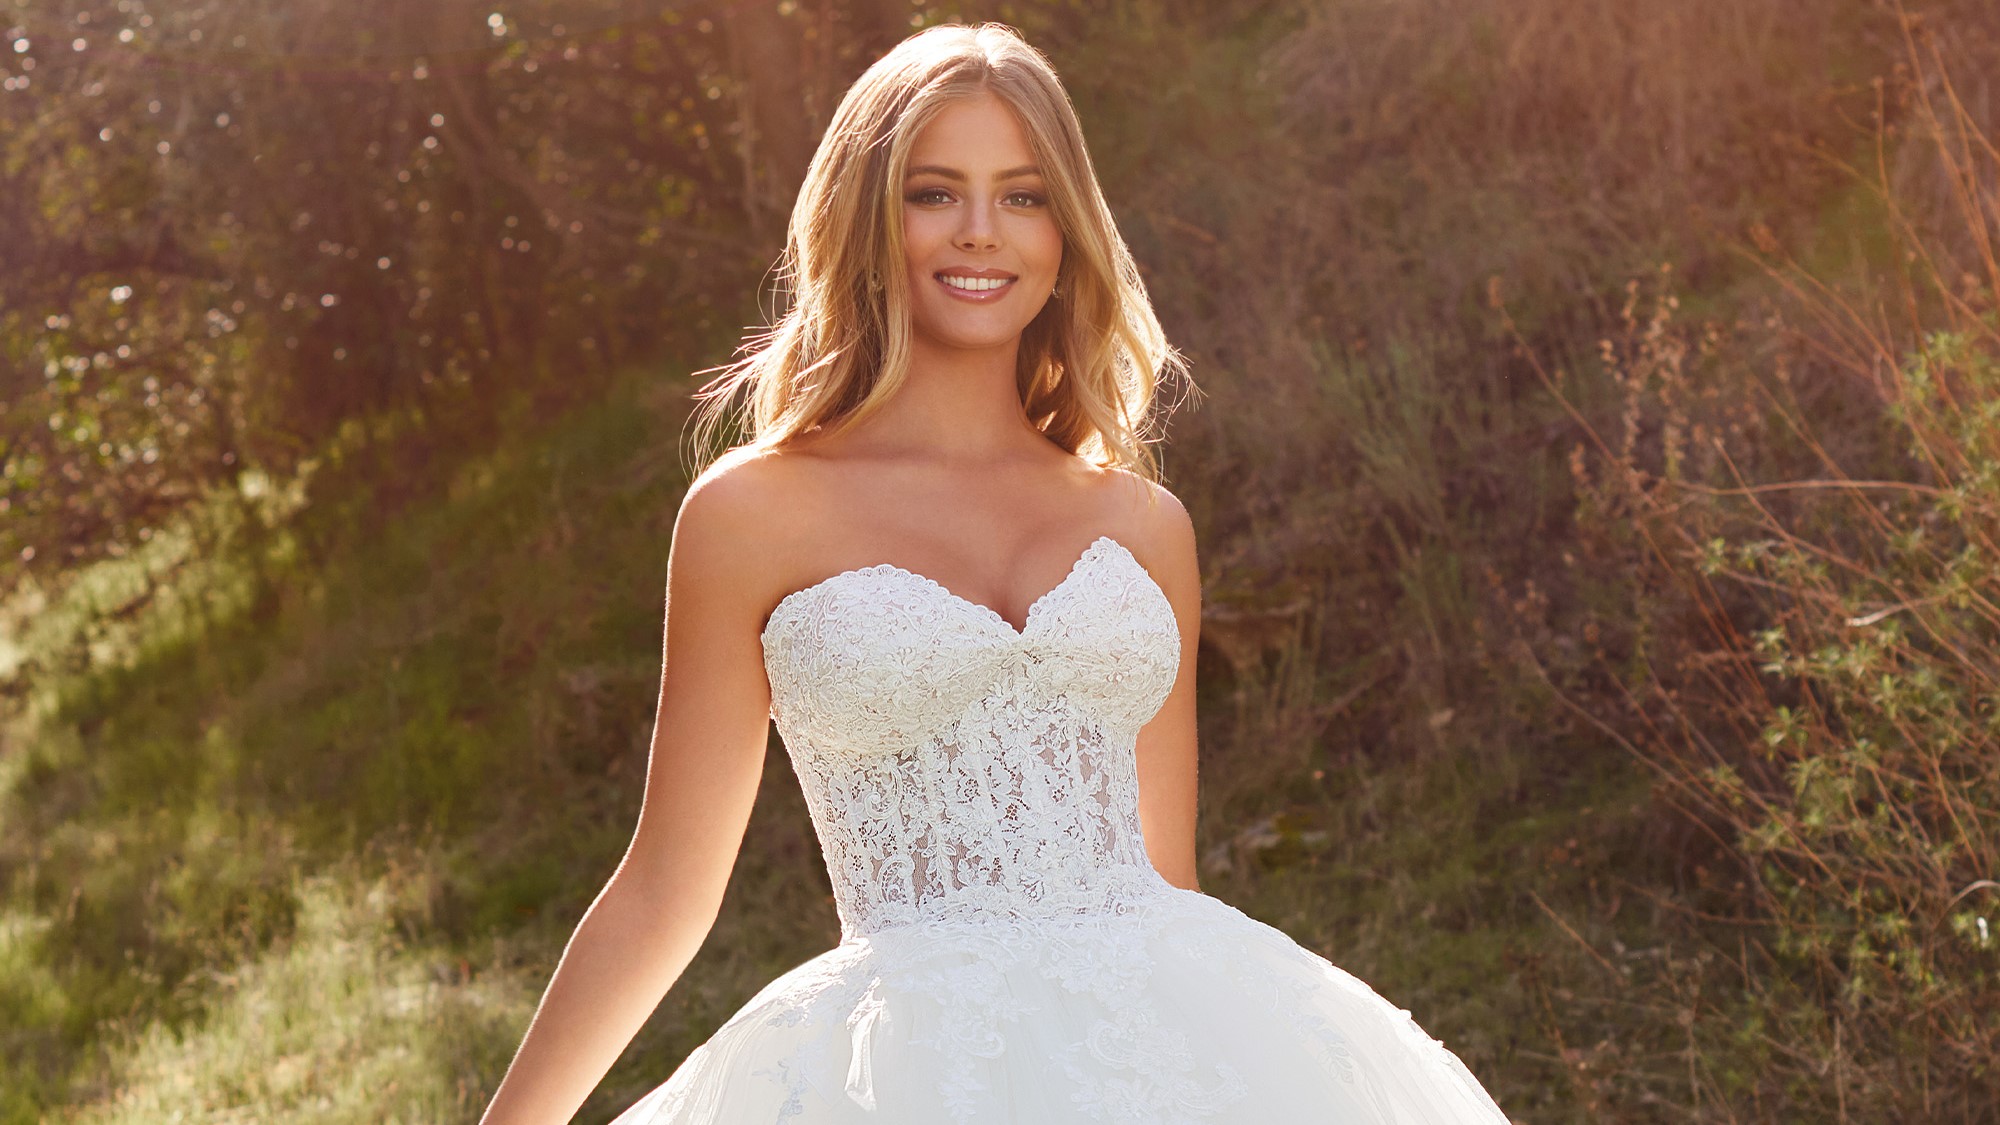 In a Princess Mood: 11 Ball Gown Wedding Dresses to Complete Your Royal Dreams Desktop Image